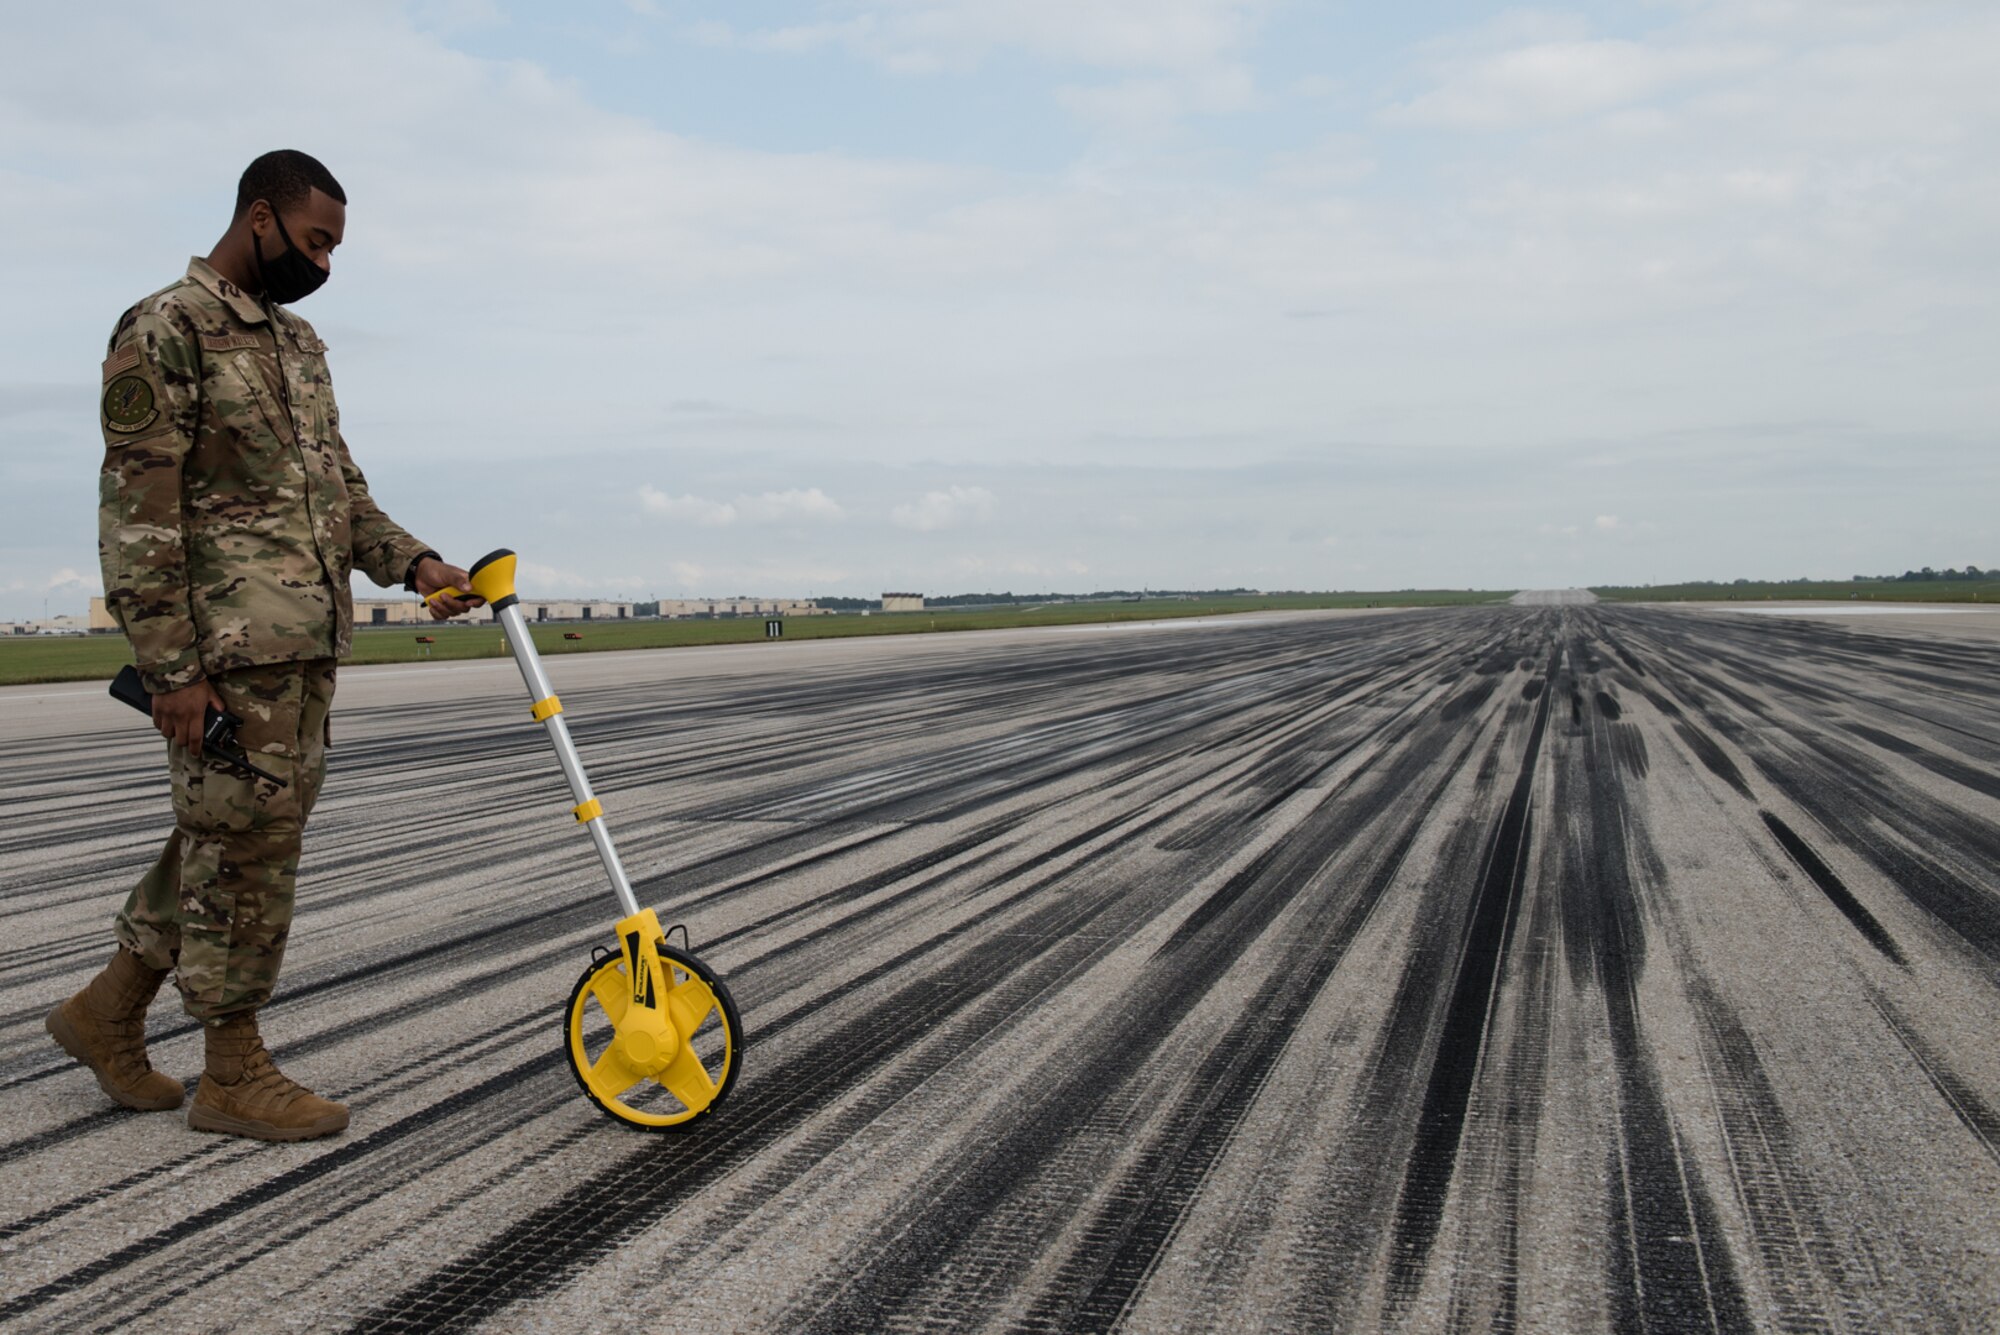 U.S. Air Force Airman Stephen Taborn-Walker, 509th Operation Support Squadron Airfield Management operations coordinator, practices measuring the width of the runway at Whiteman Air Force Base, Missouri, Sept. 23, 2020. The width of the runway determines what kind of aircraft can divert to Whiteman AFB, in case of an emergency. (U.S. Air Force photo by Airman 1st Class Christina Carter)